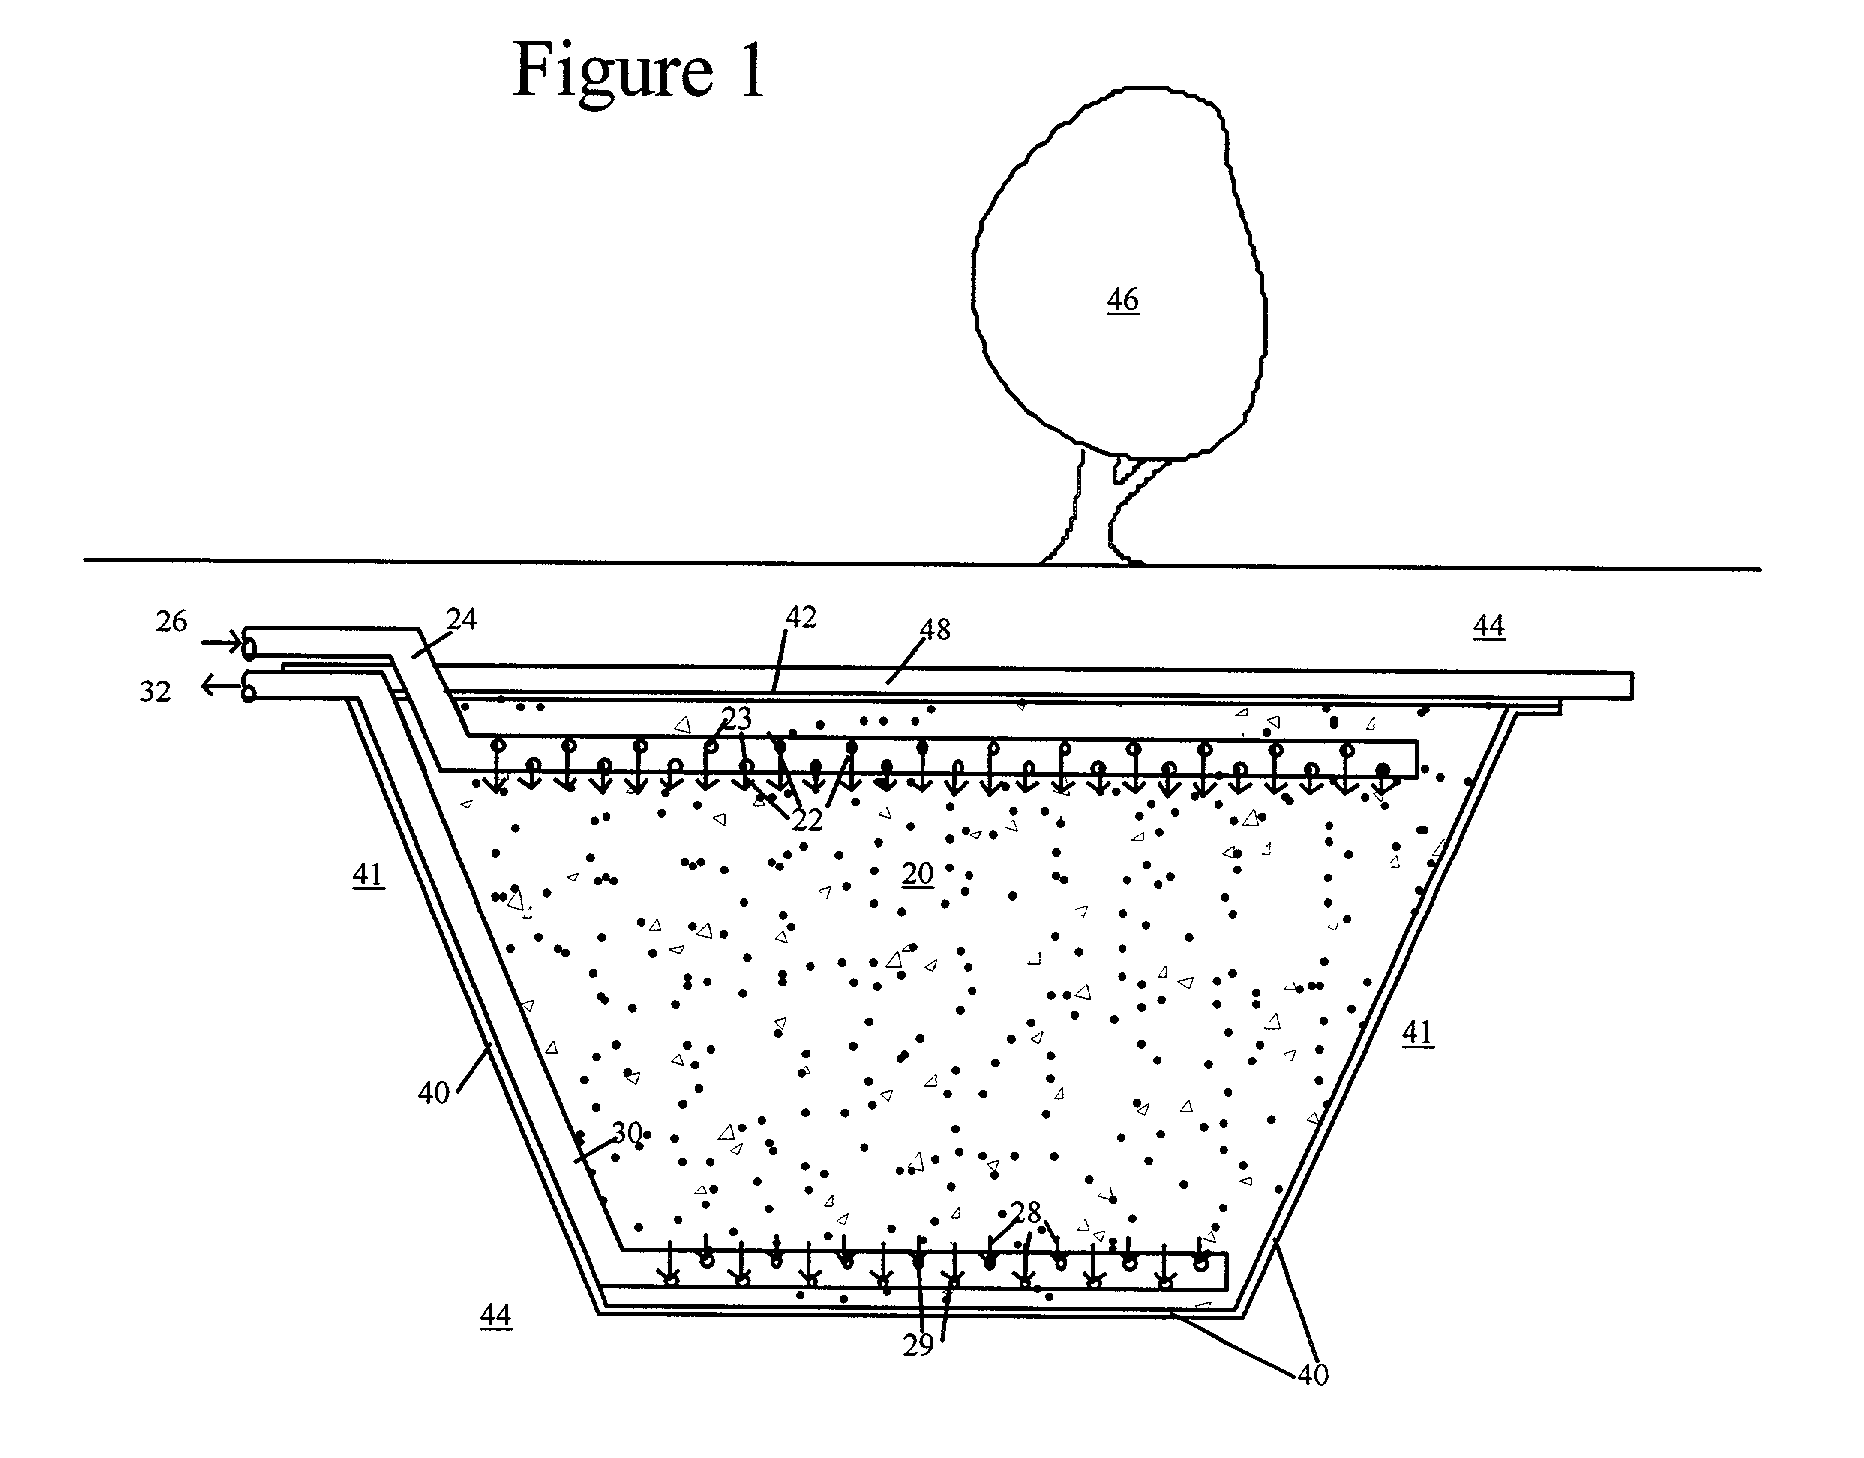 Air-conditioning system with thermal storage